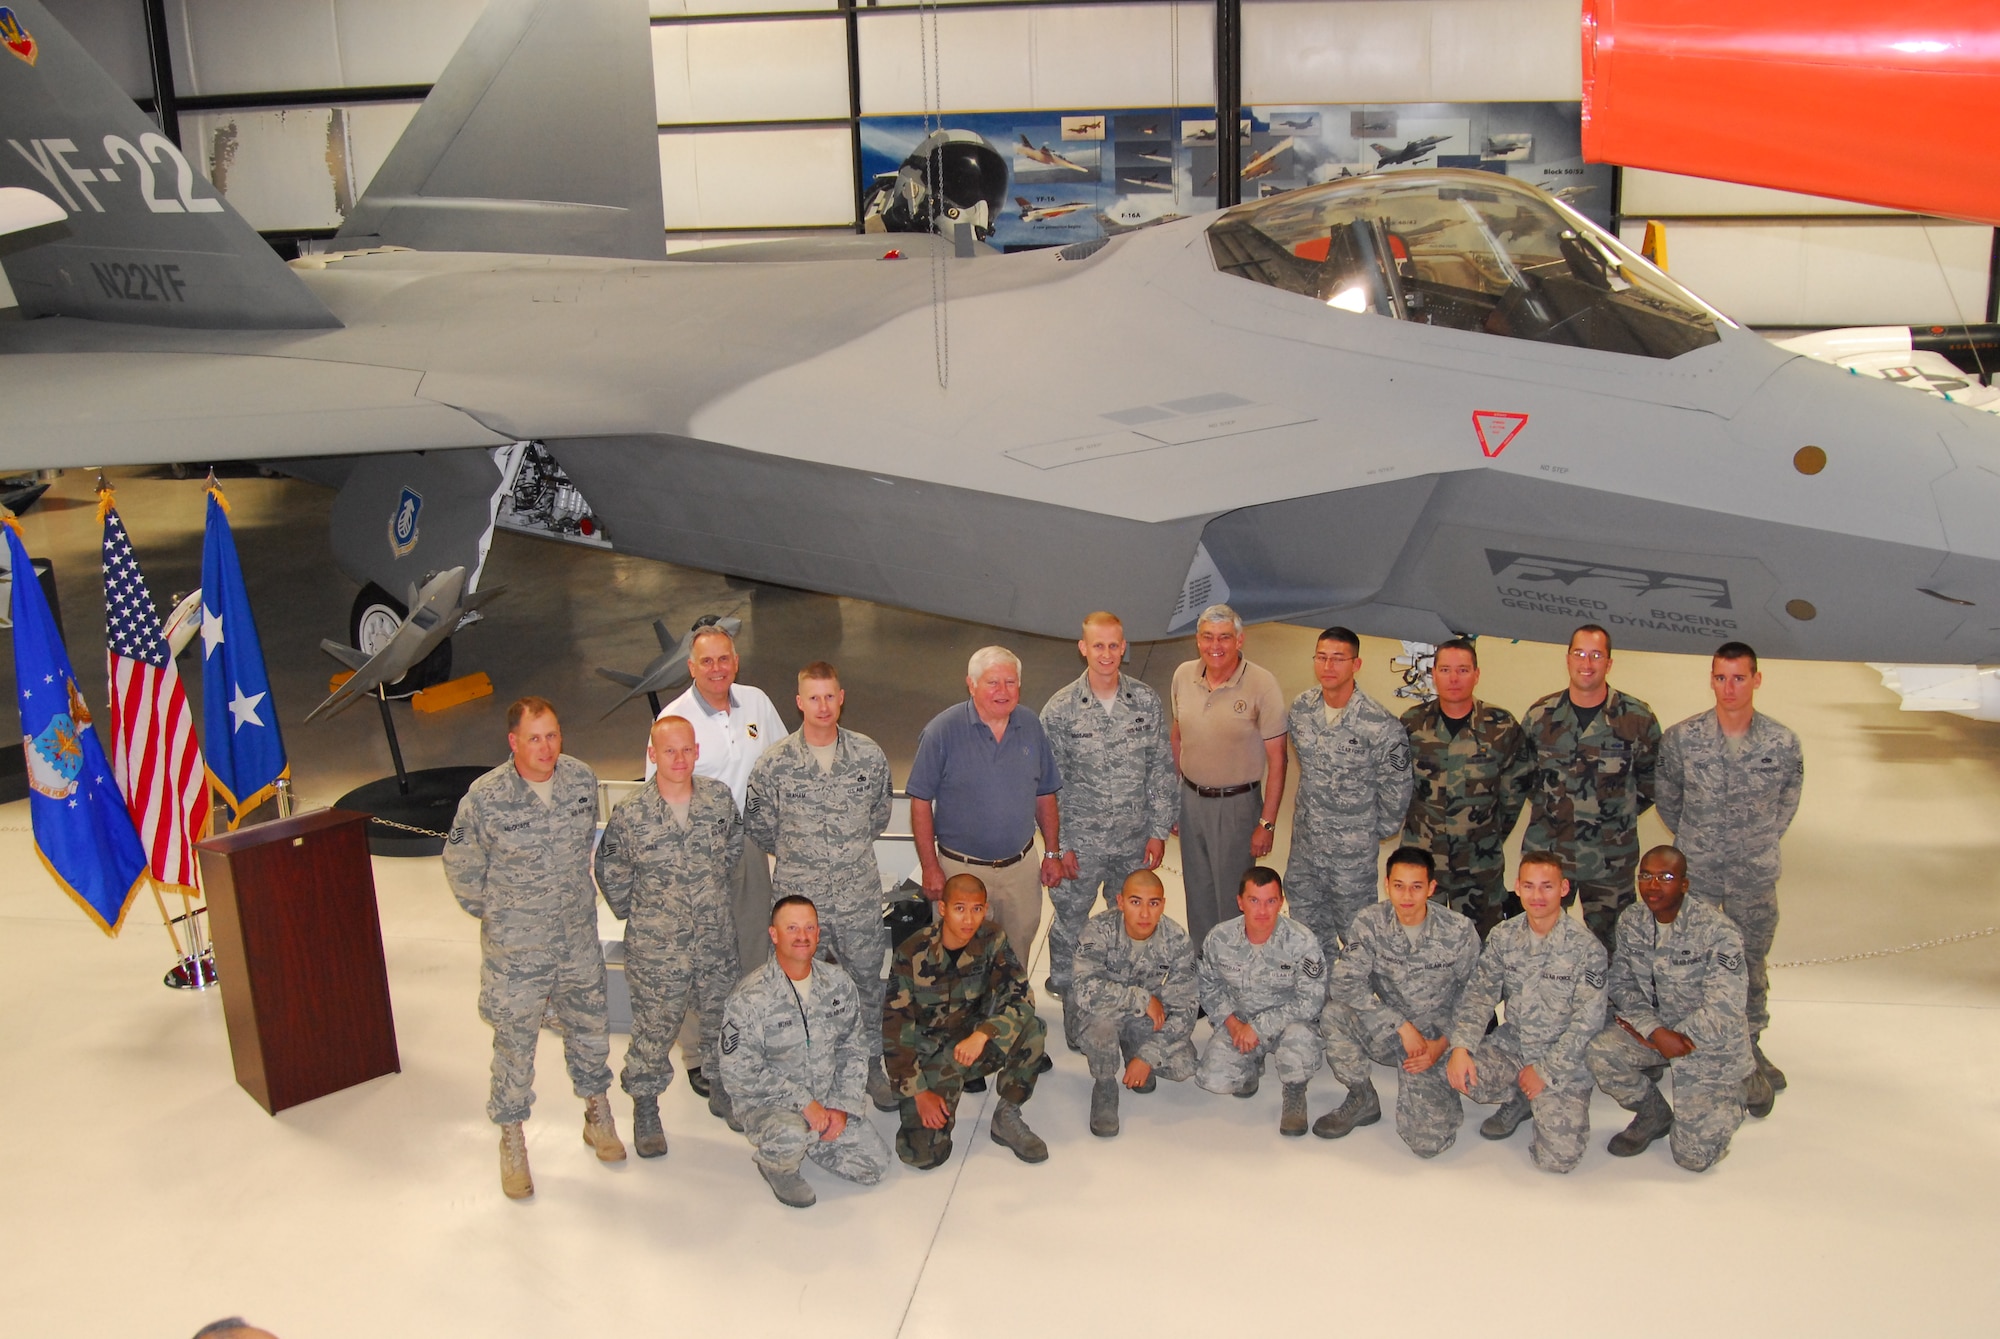 Fourteen of the 22 Airman who were hands-on in the process of bringing the first YF-22 Raptor prototype built, pose in front of the aircraft with Mr. David Ferguson (blue shirt), first Raptor test pilot, Mr. Tom Morgenfeld (tan shirt), last Raptor test pilot and Mr. Fredrick Johnsen (white shirt), Air Force Flight Test Center Museum director, that were instrumental in bringing back to Edwards, its flight-test home.